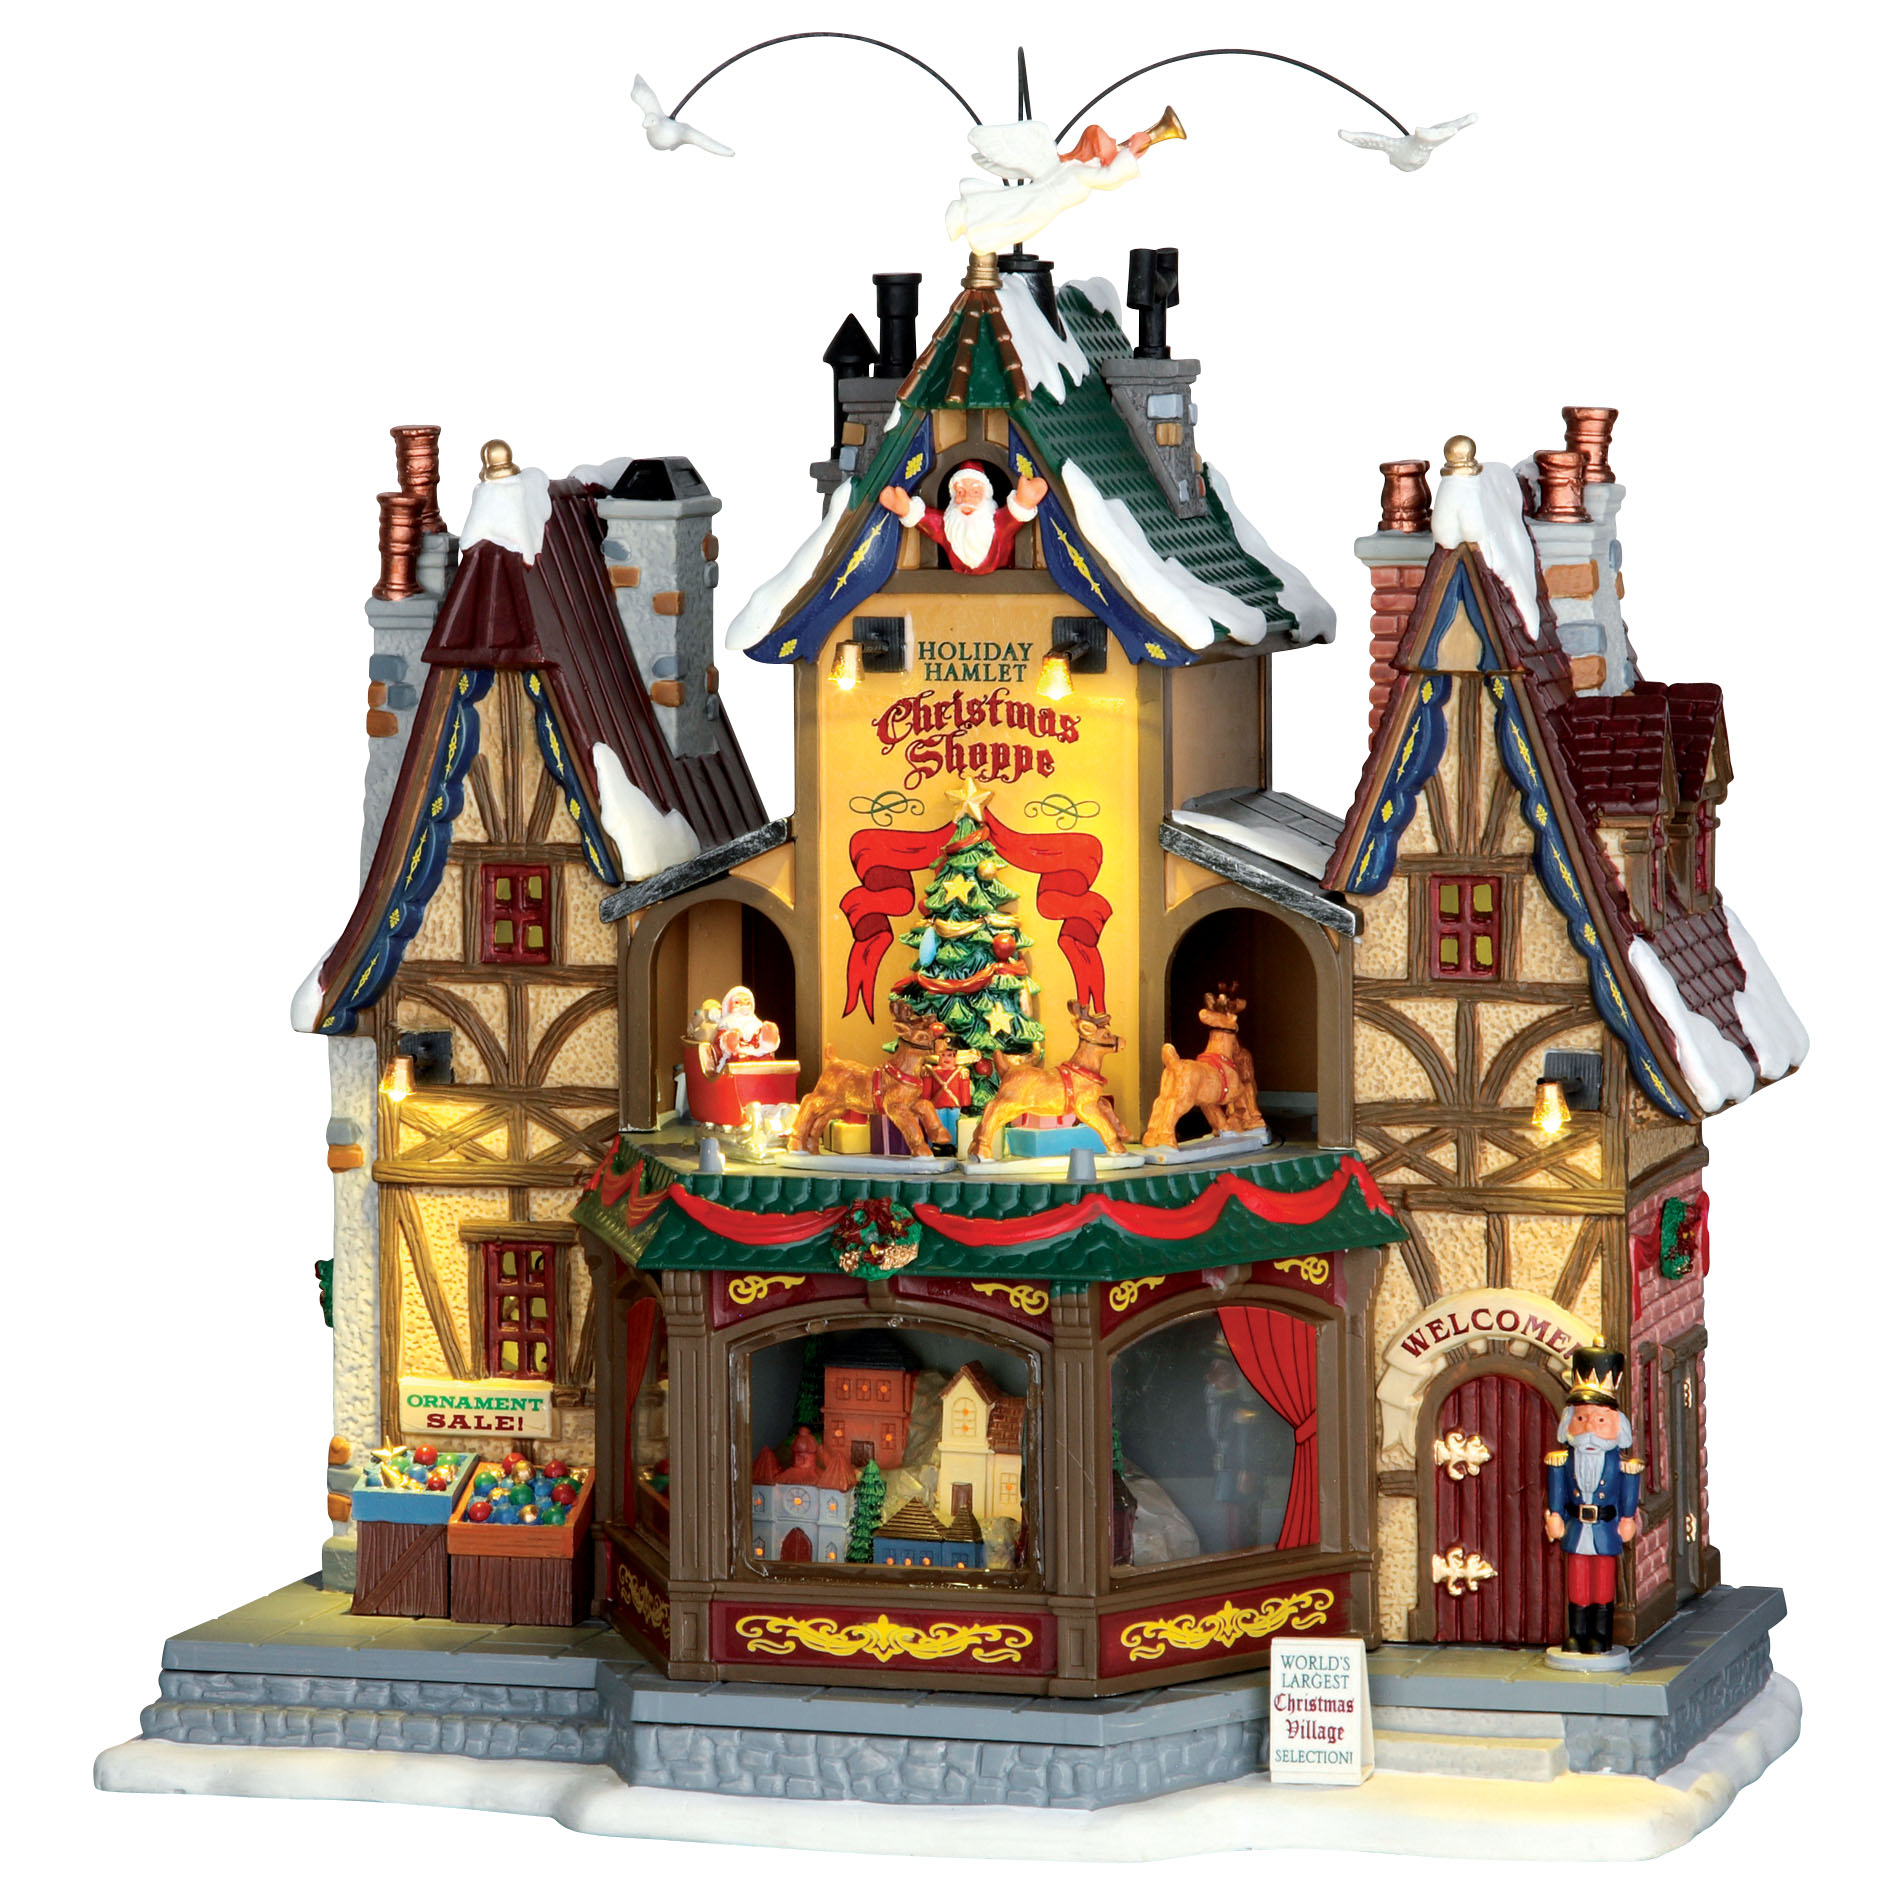 Lemax Village Collection Christmas Village Building Holiday, Hamlet Christmas Shoppe, With 4.5V Adaptor